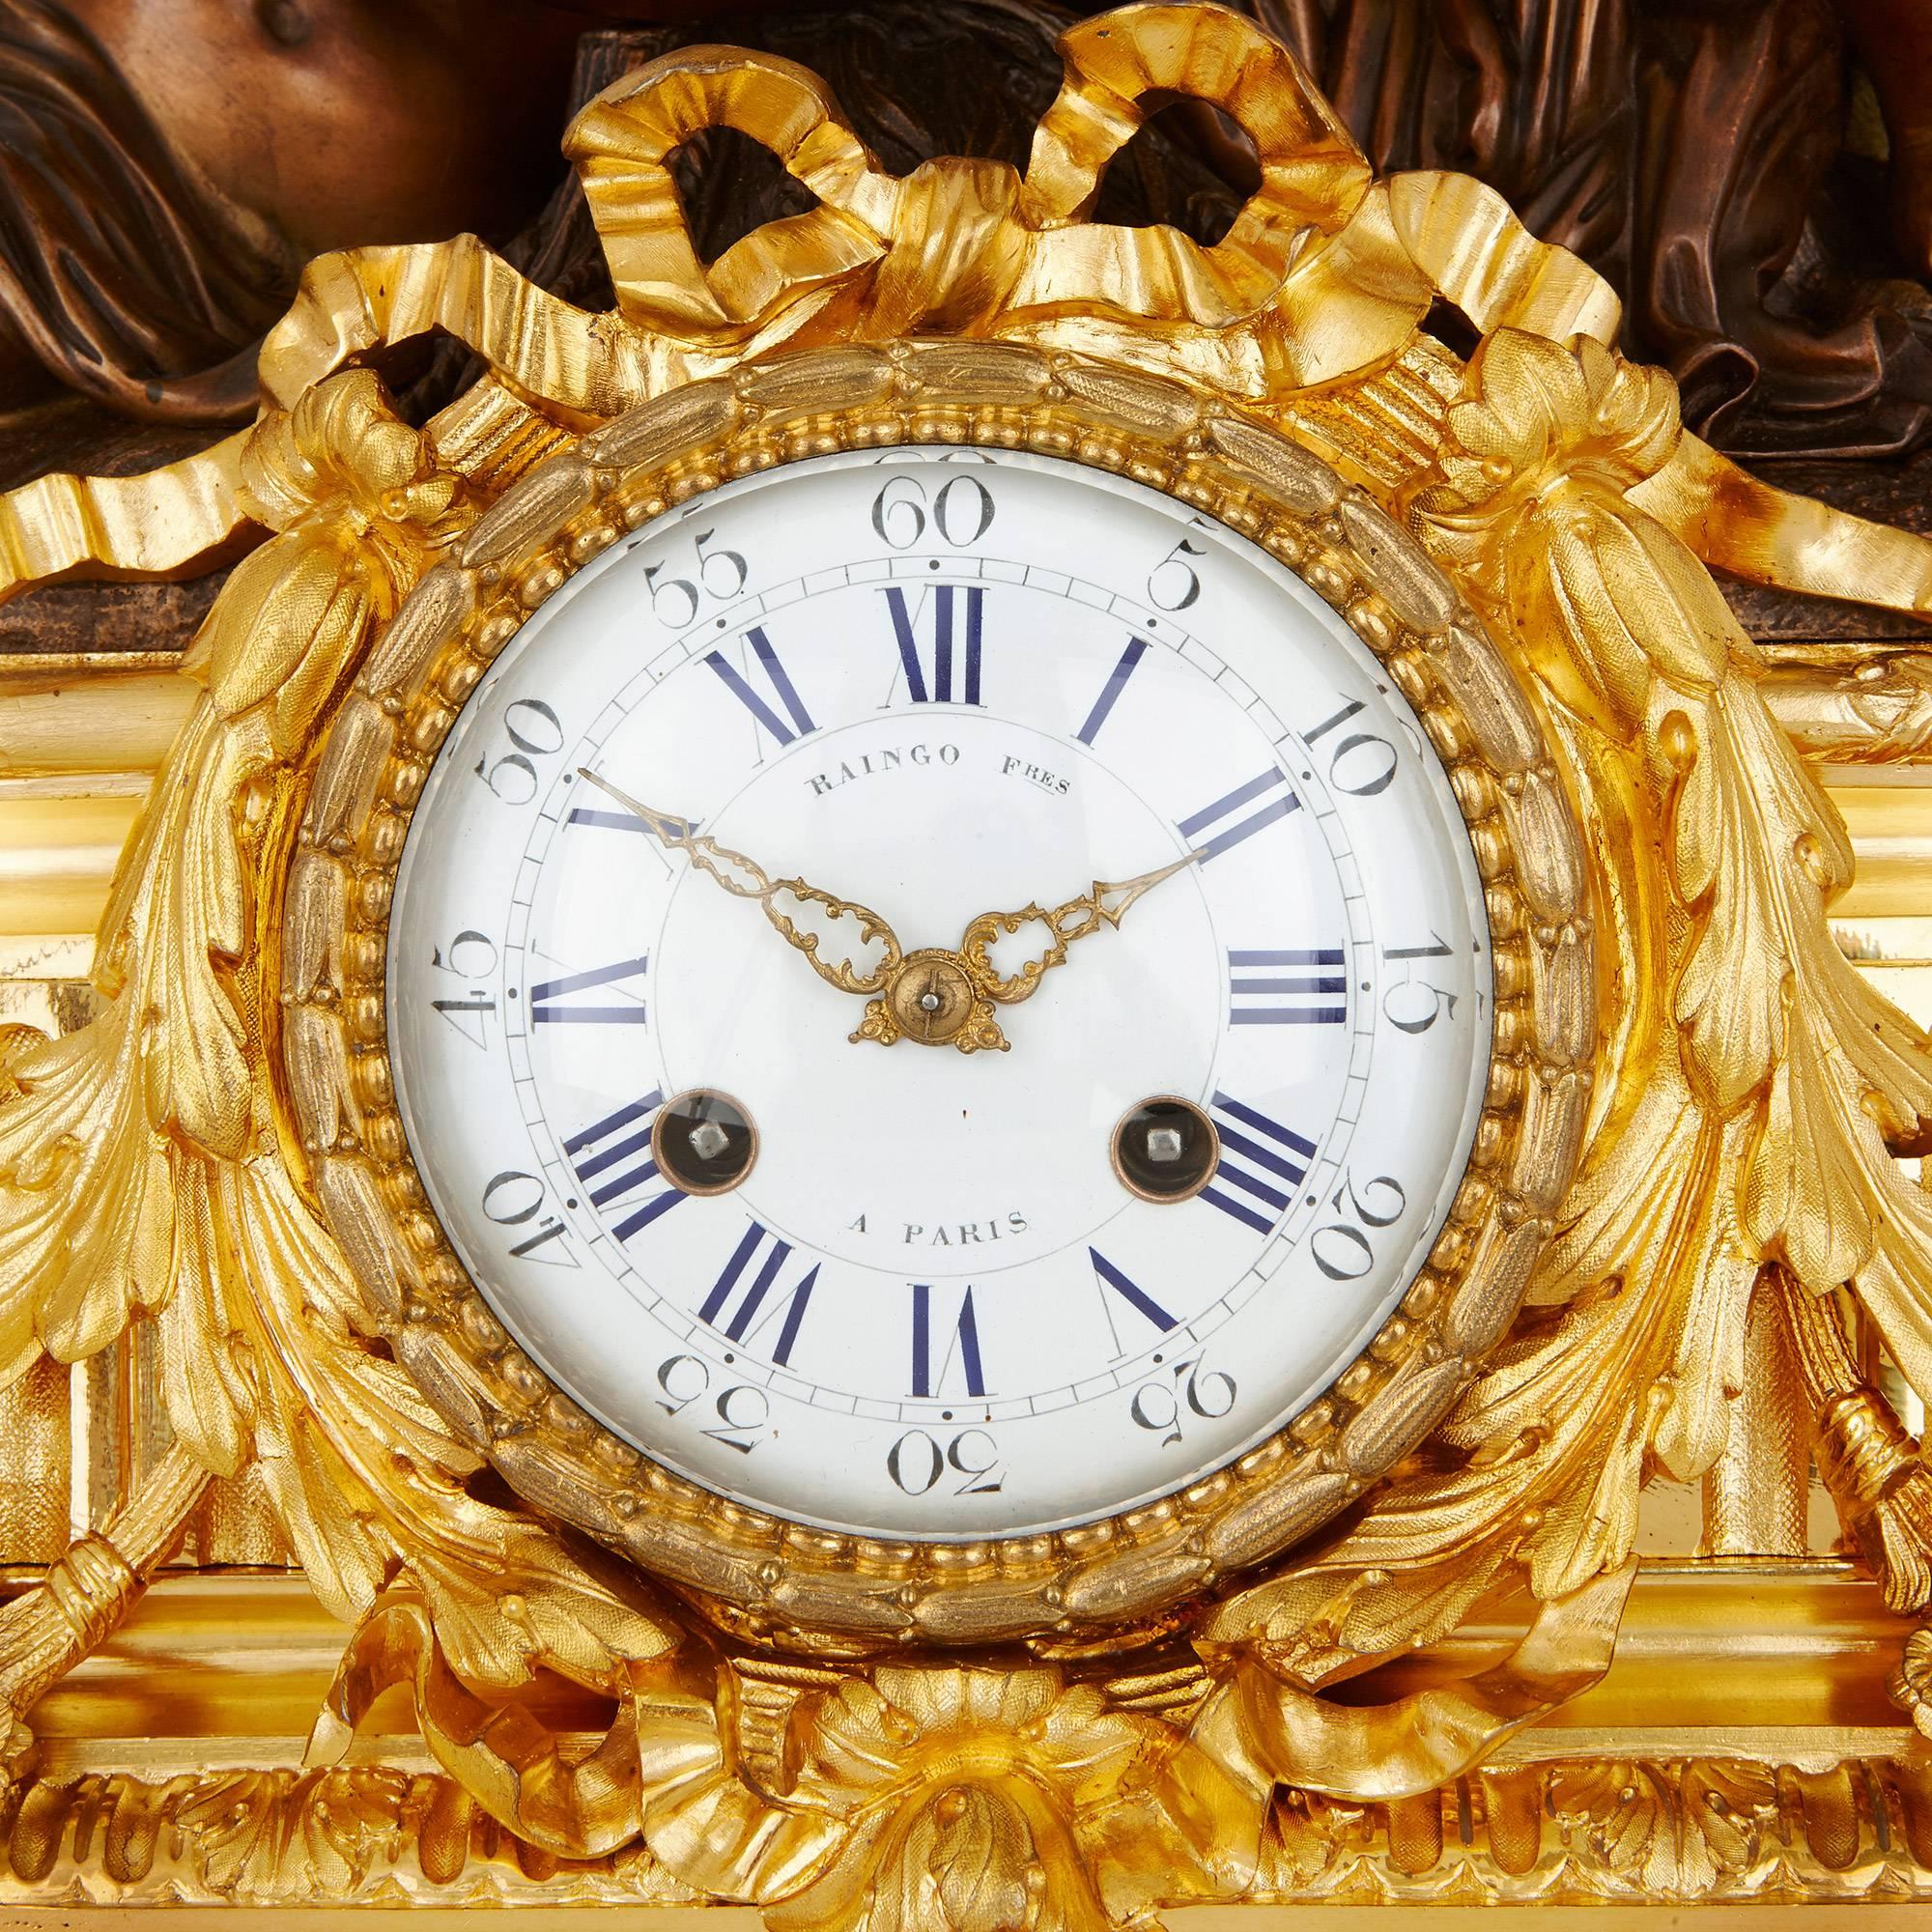 This magnificent clock set is the work of celebrated French maker Henri Picard, who collaborated on this fine piece together with the famous firm of clockmakers, Raingo Freres. Both workshops were leading makers of the 19th century, and their union